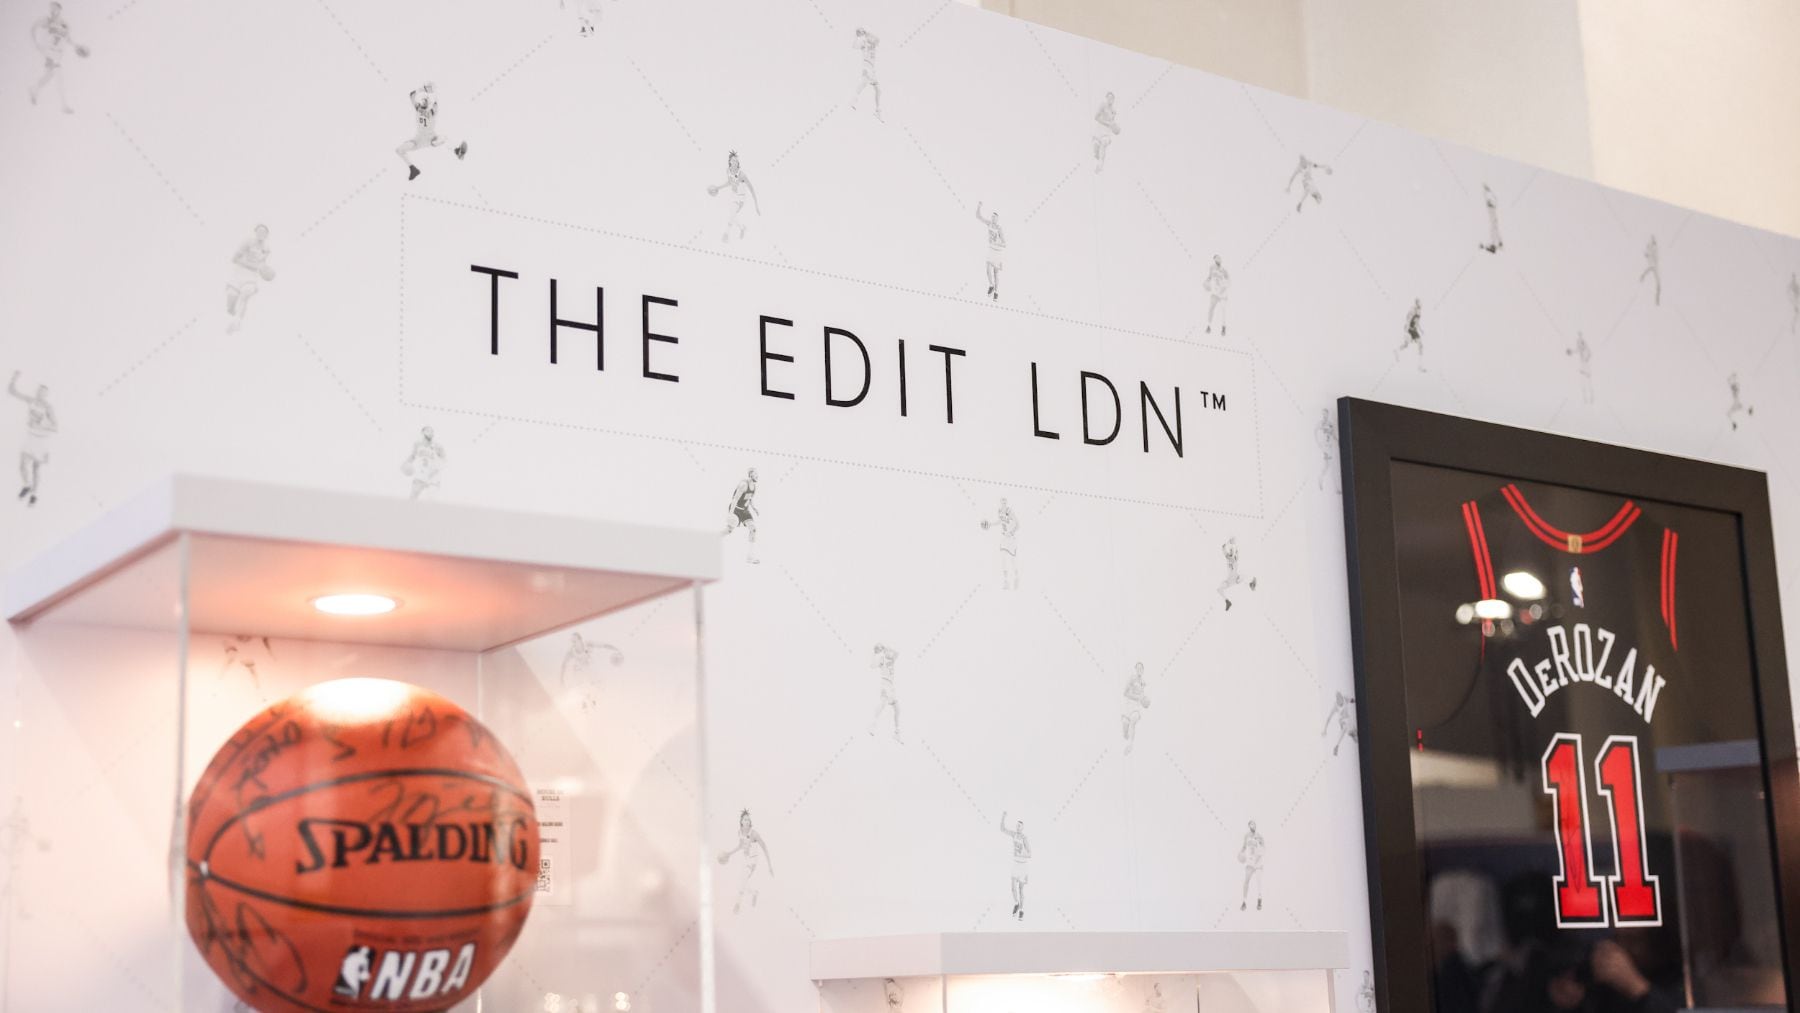 Off-Price Retailer Brand Alley Has Acquired The Edit Ldn, a Sneaker Resale Platform